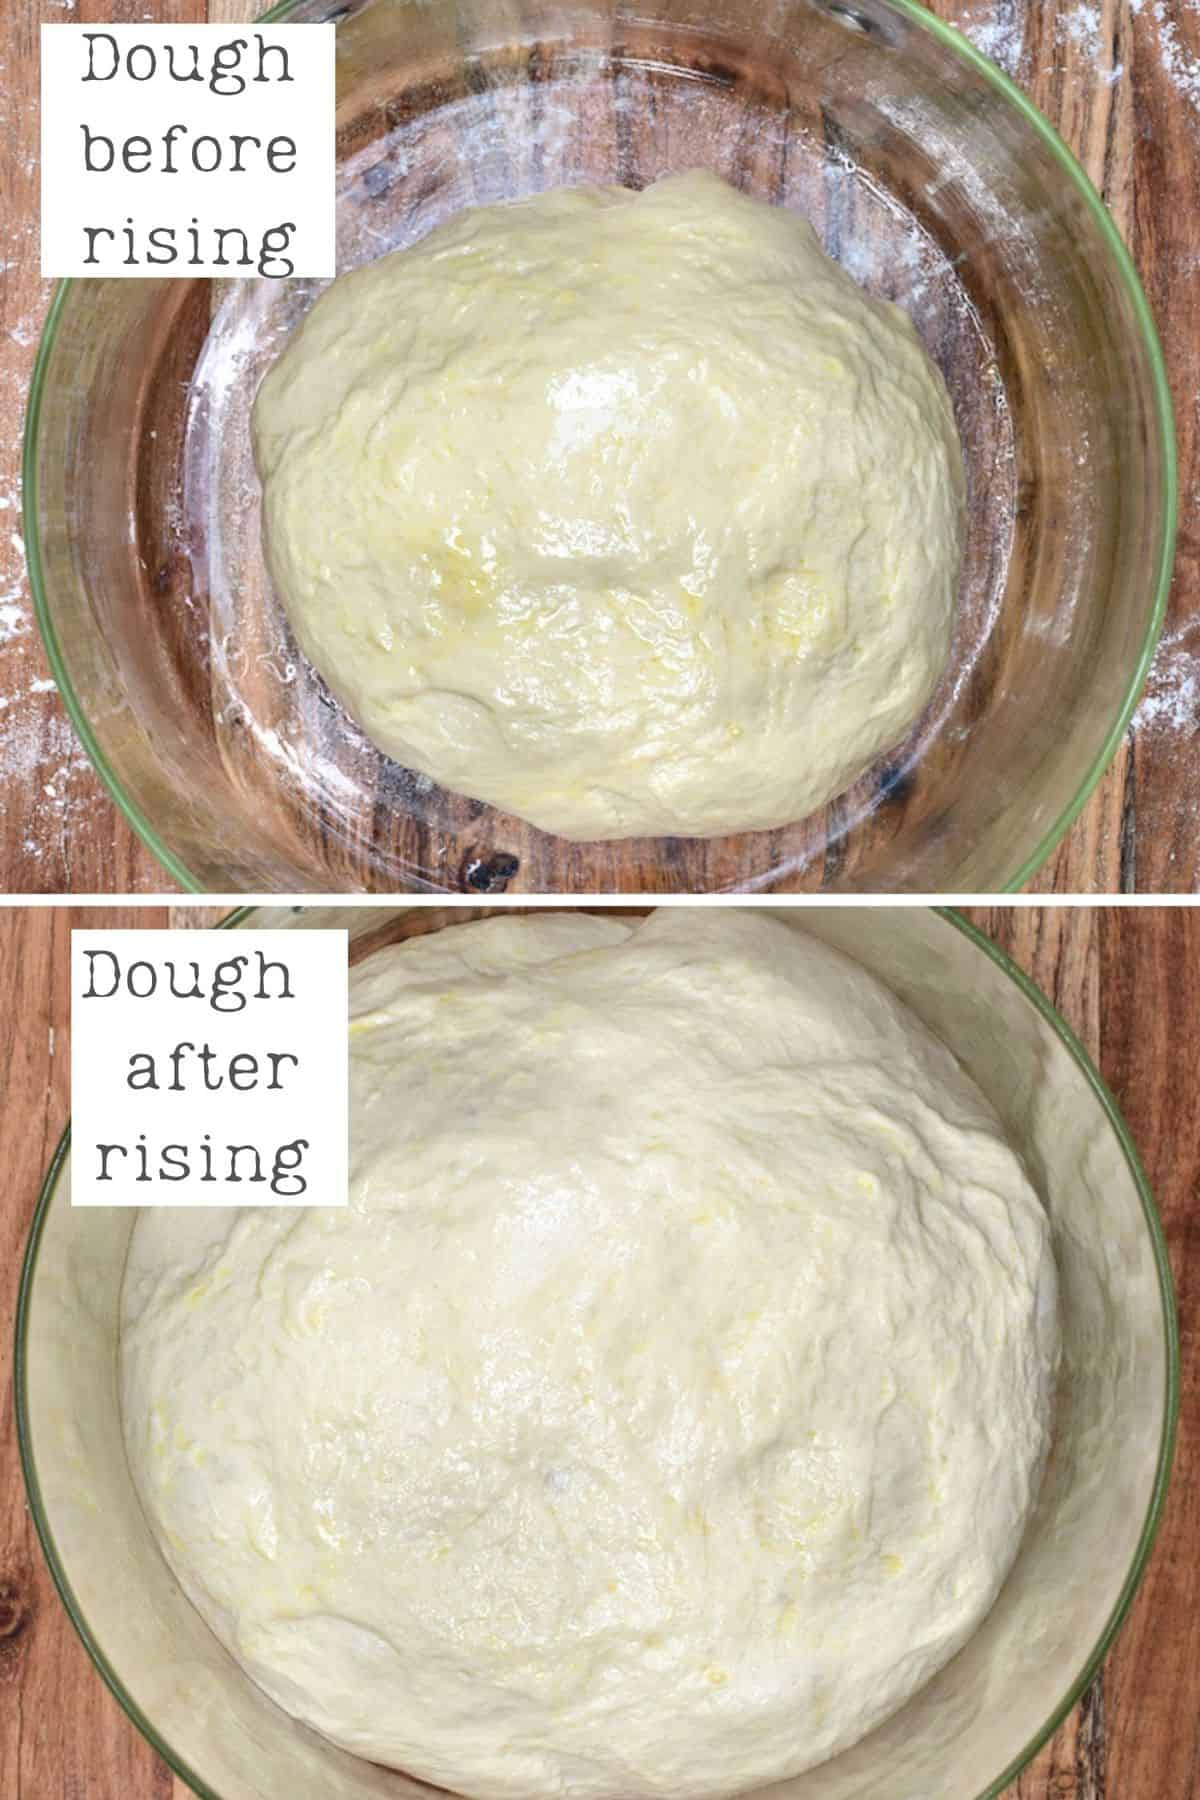 Bagel dough before and after rising